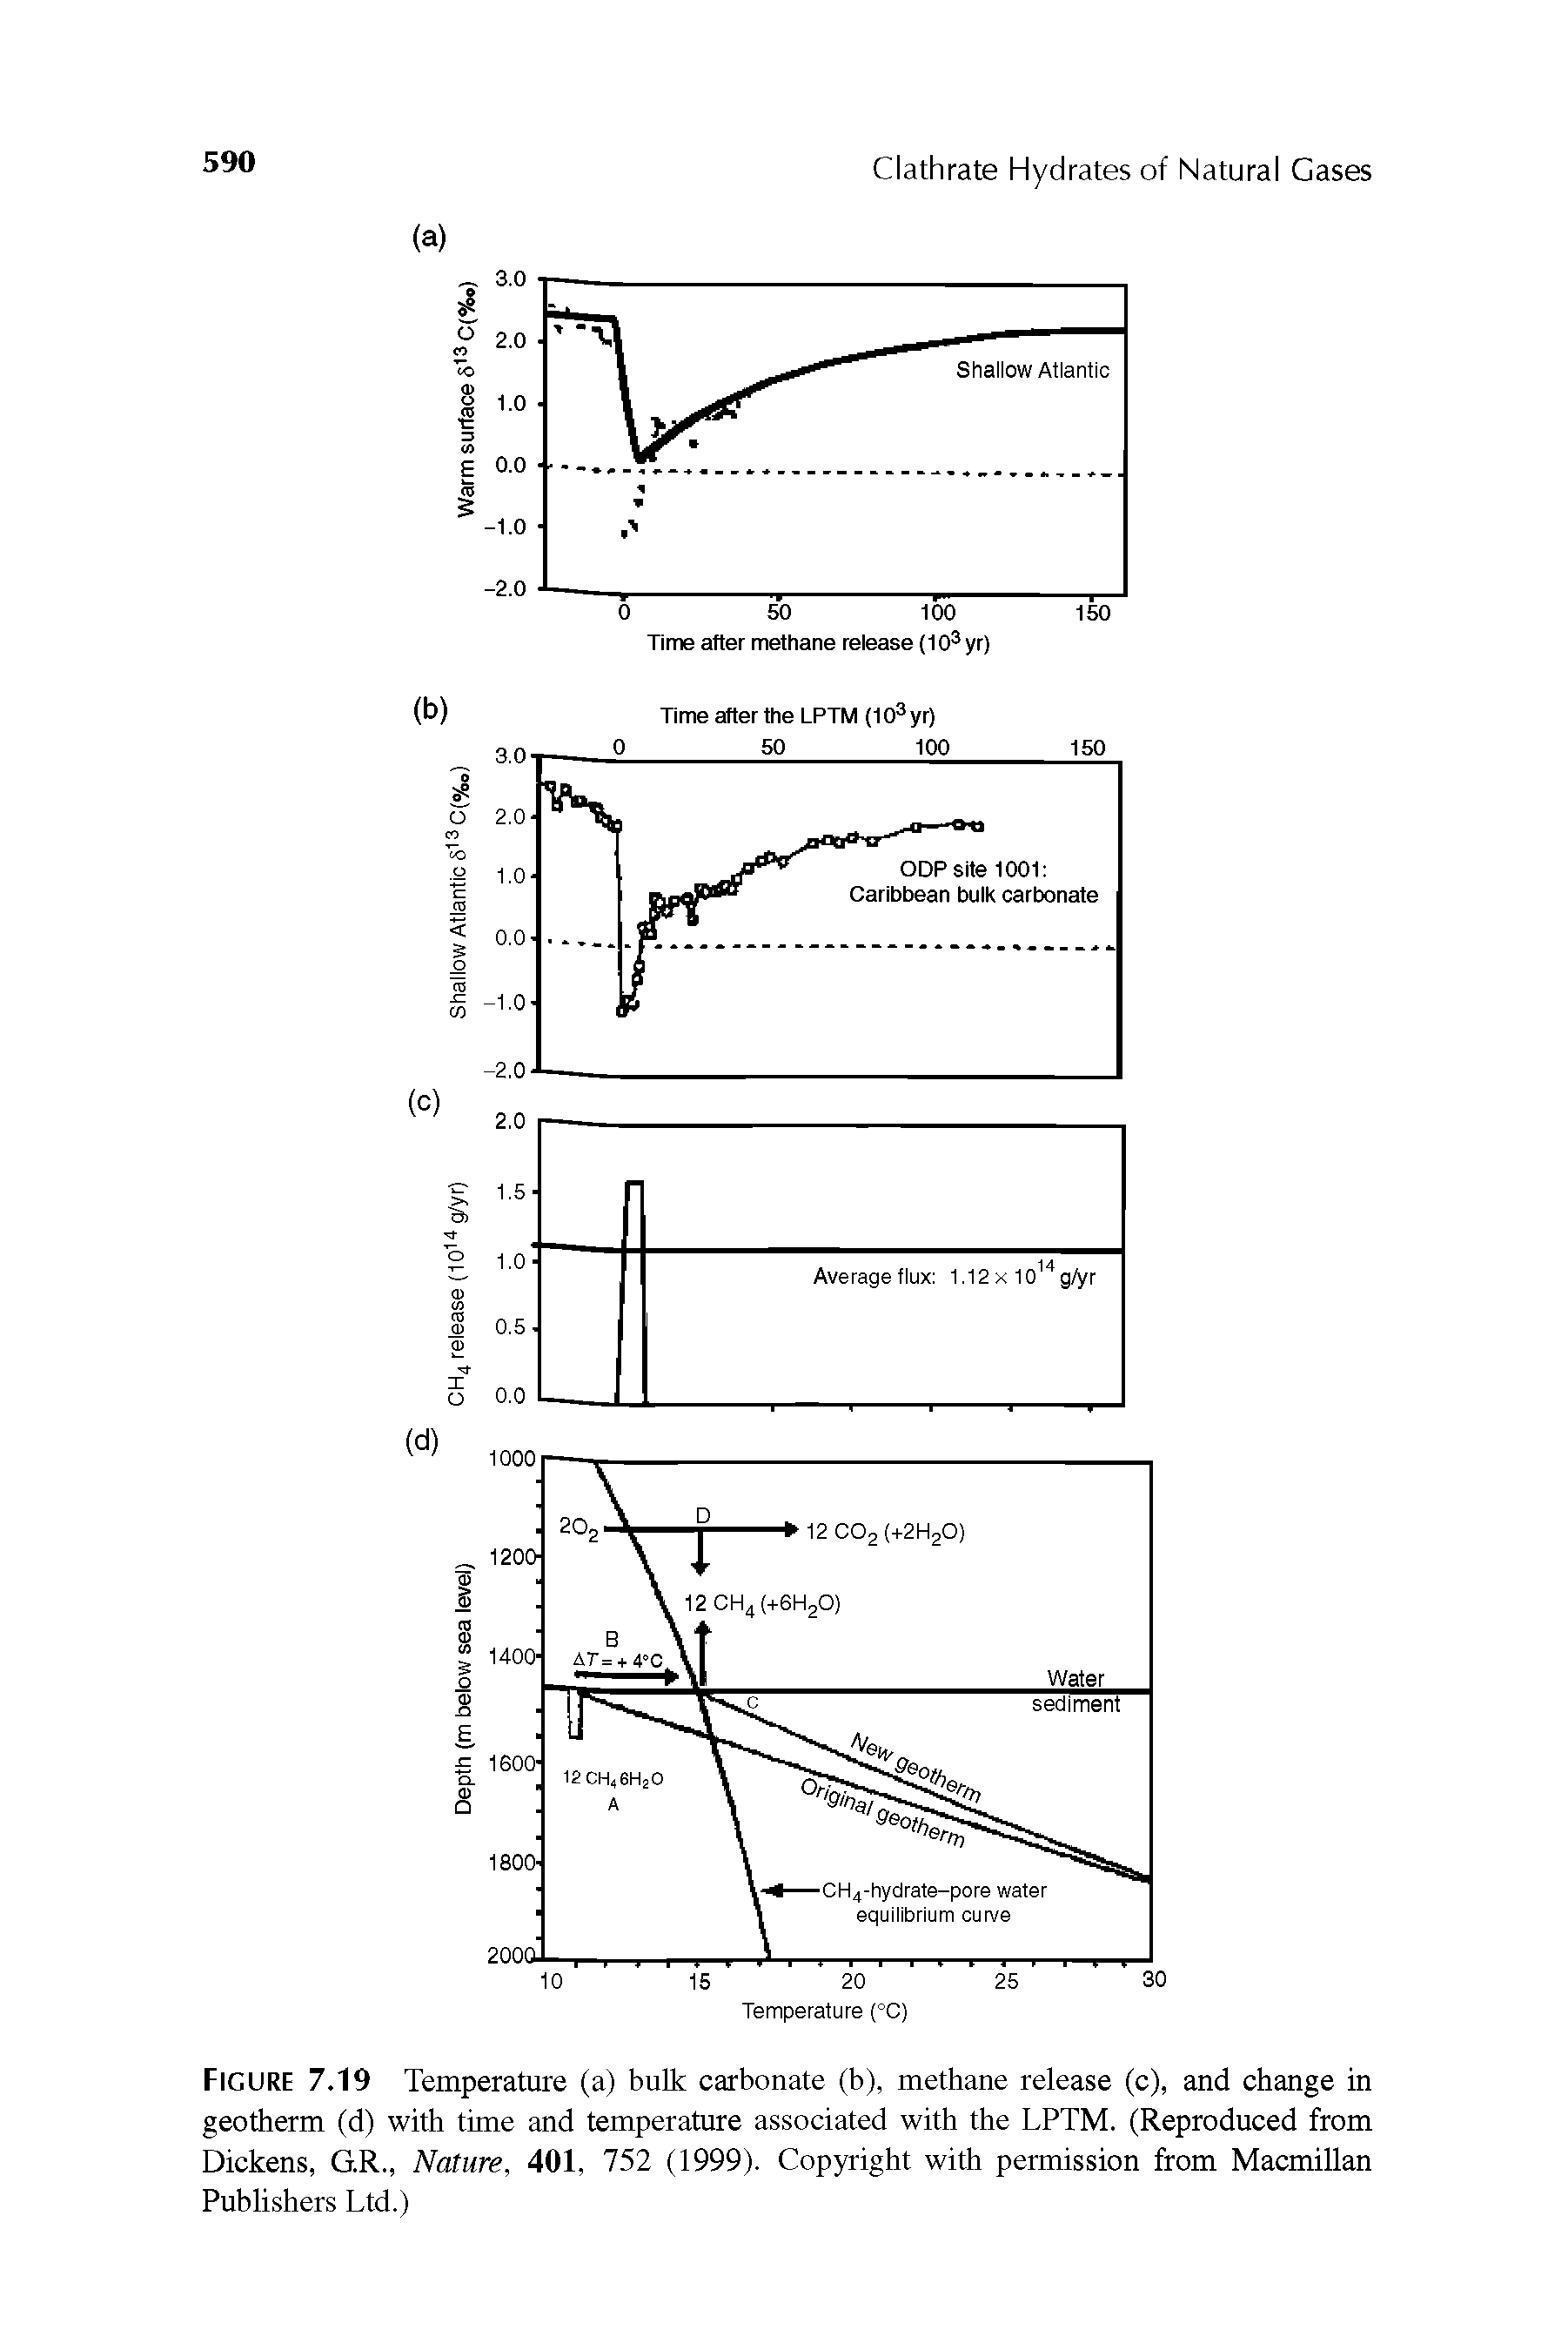 Figure 7.19 Temperature (a) bulk carbonate (b), methane release (c), and change in geotherm (d) with time and temperature associated with the LPTM. (Reproduced from Dickens, G.R., Nature, 401, 752 (1999). Copyright with permission from Macmillan Publishers Ltd.)...